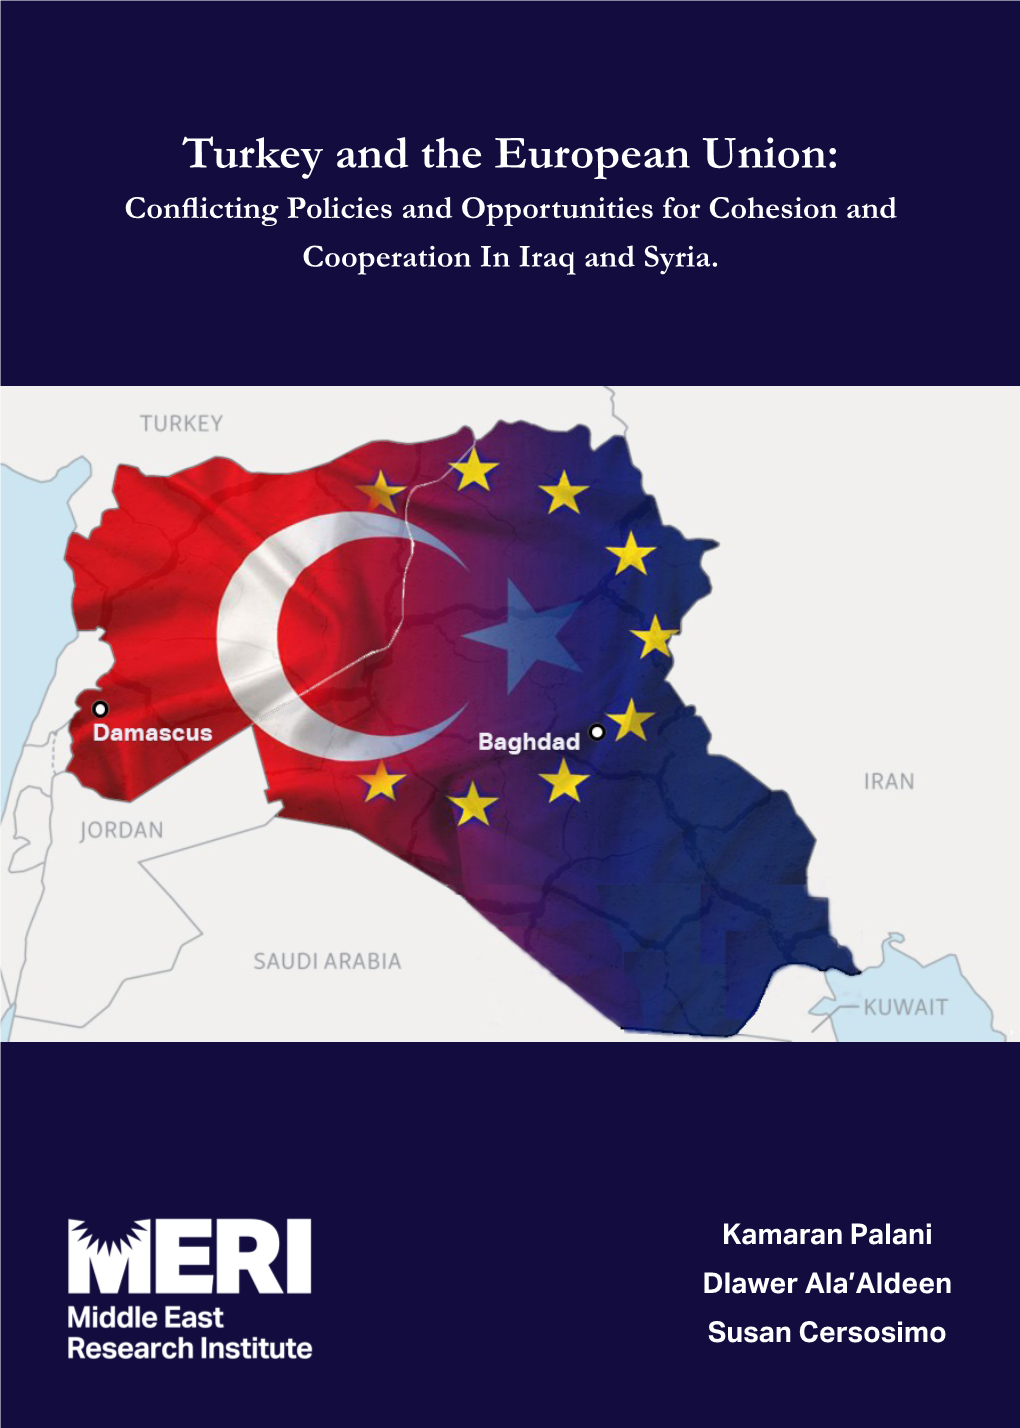 Turkey and the European Union: Conflicting Policies and Opportunities for Cohesion and Cooperation in Iraq and Syria